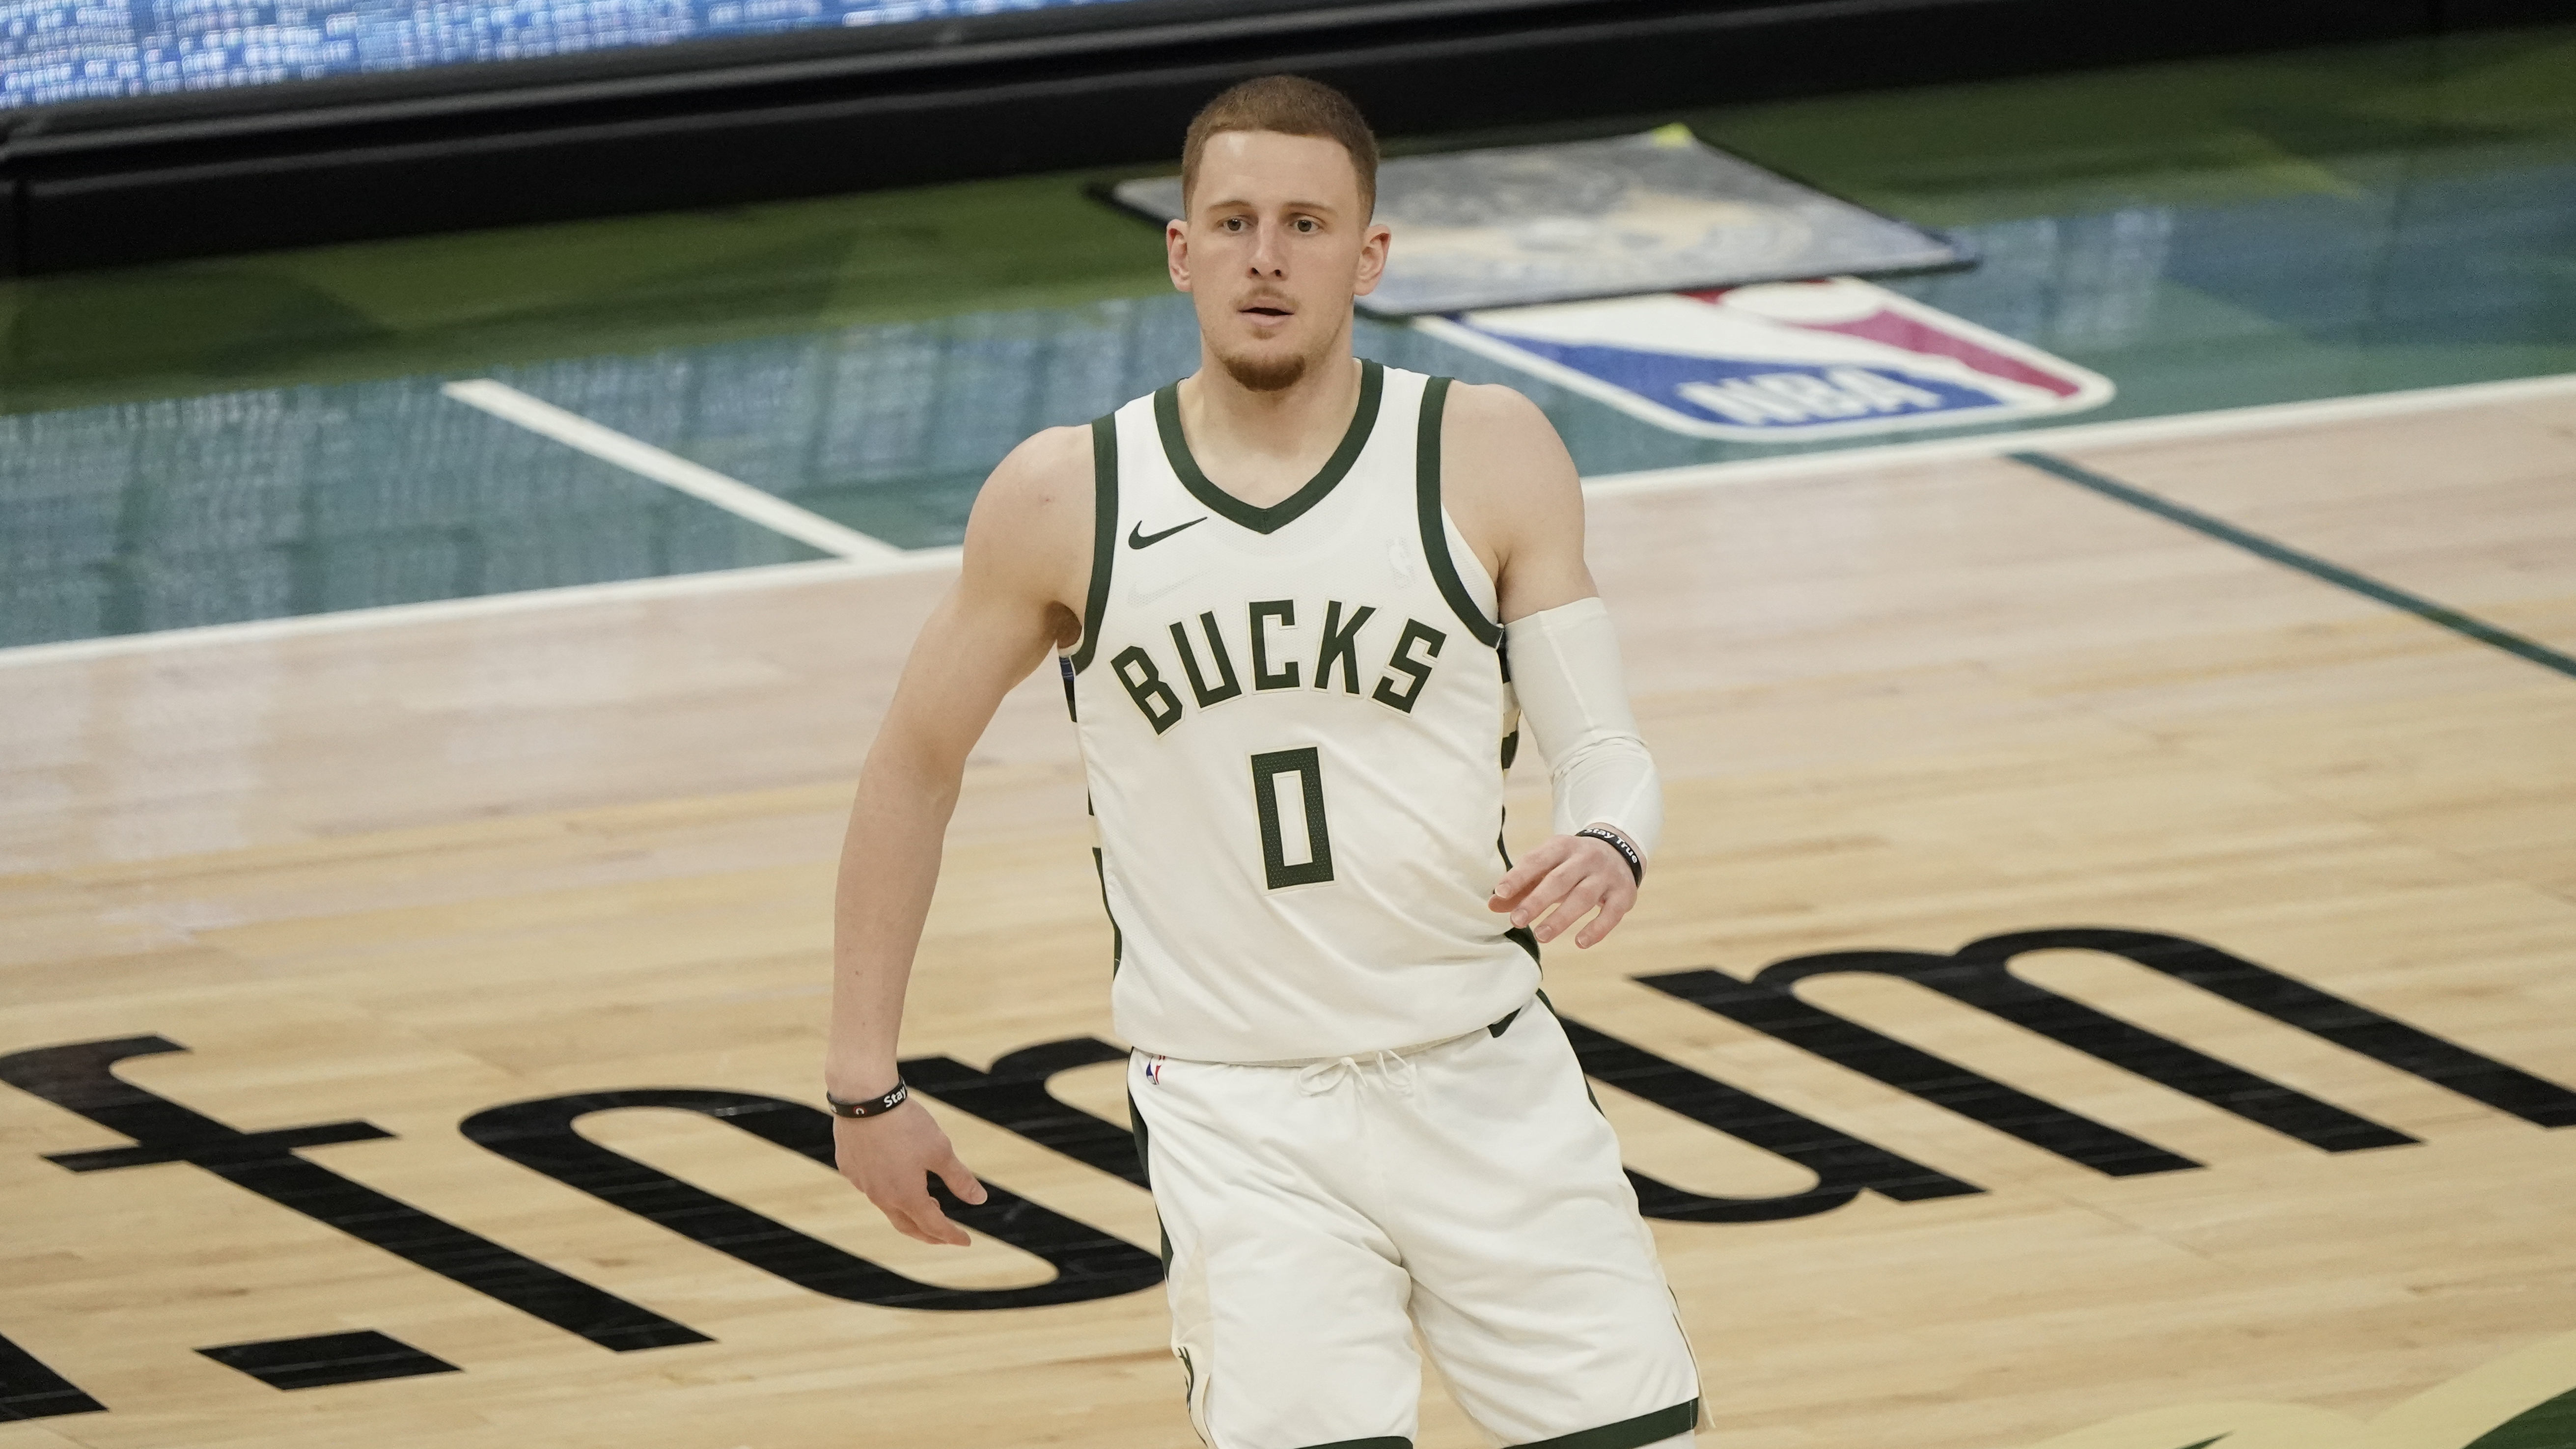 Bucks' DiVincenzo savors return to action after long absence